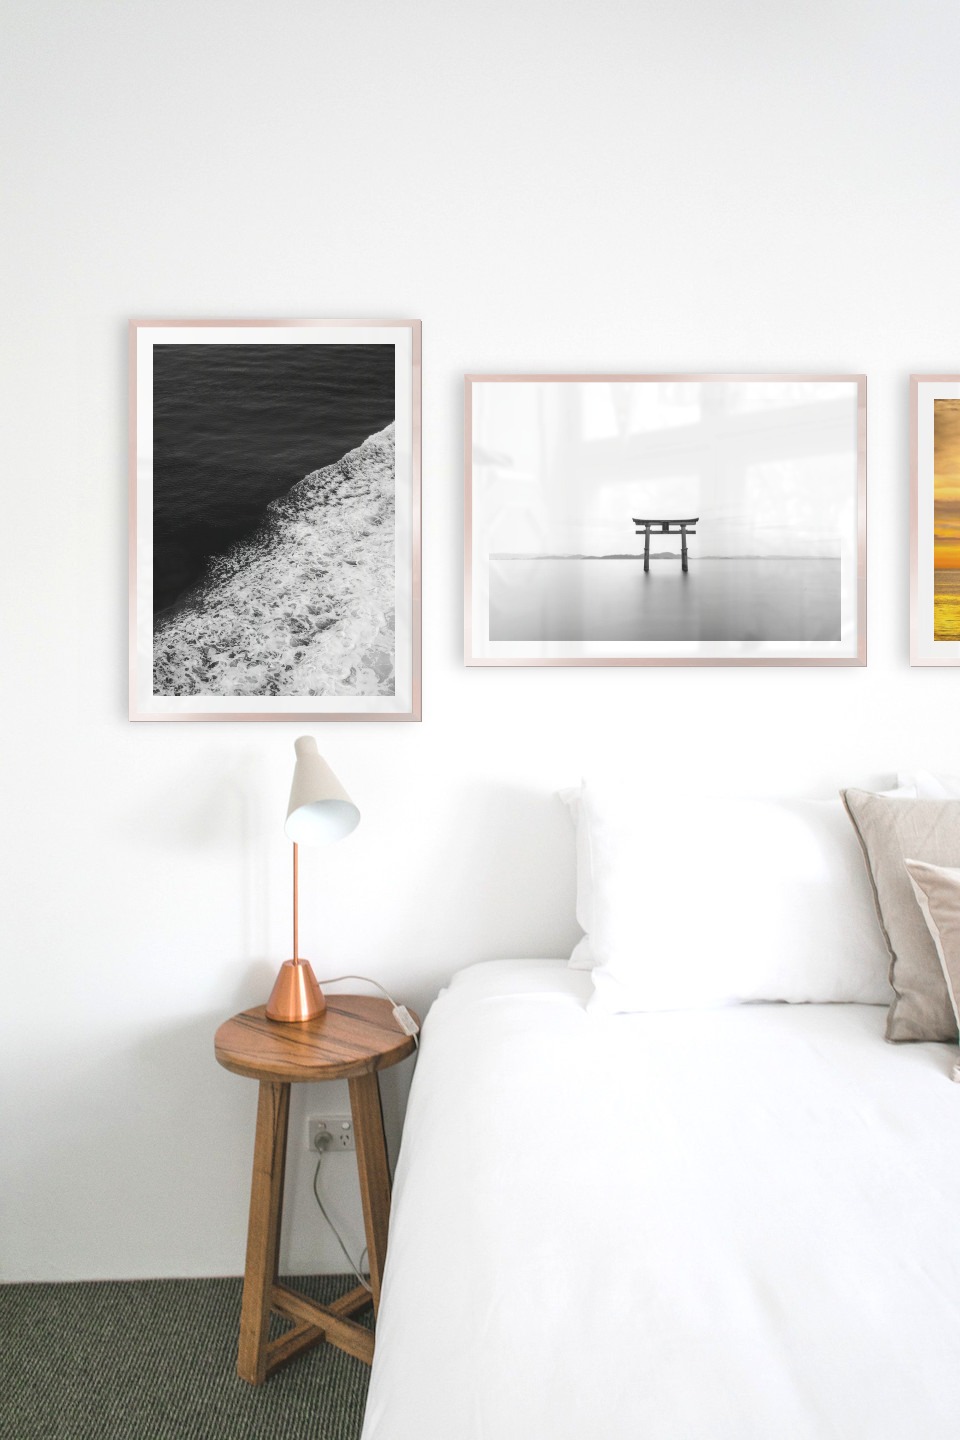 Gallery wall with picture frames in copper in sizes 50x70 with prints "Swell from waves", "Pillars in the water" and "Ships at sea"